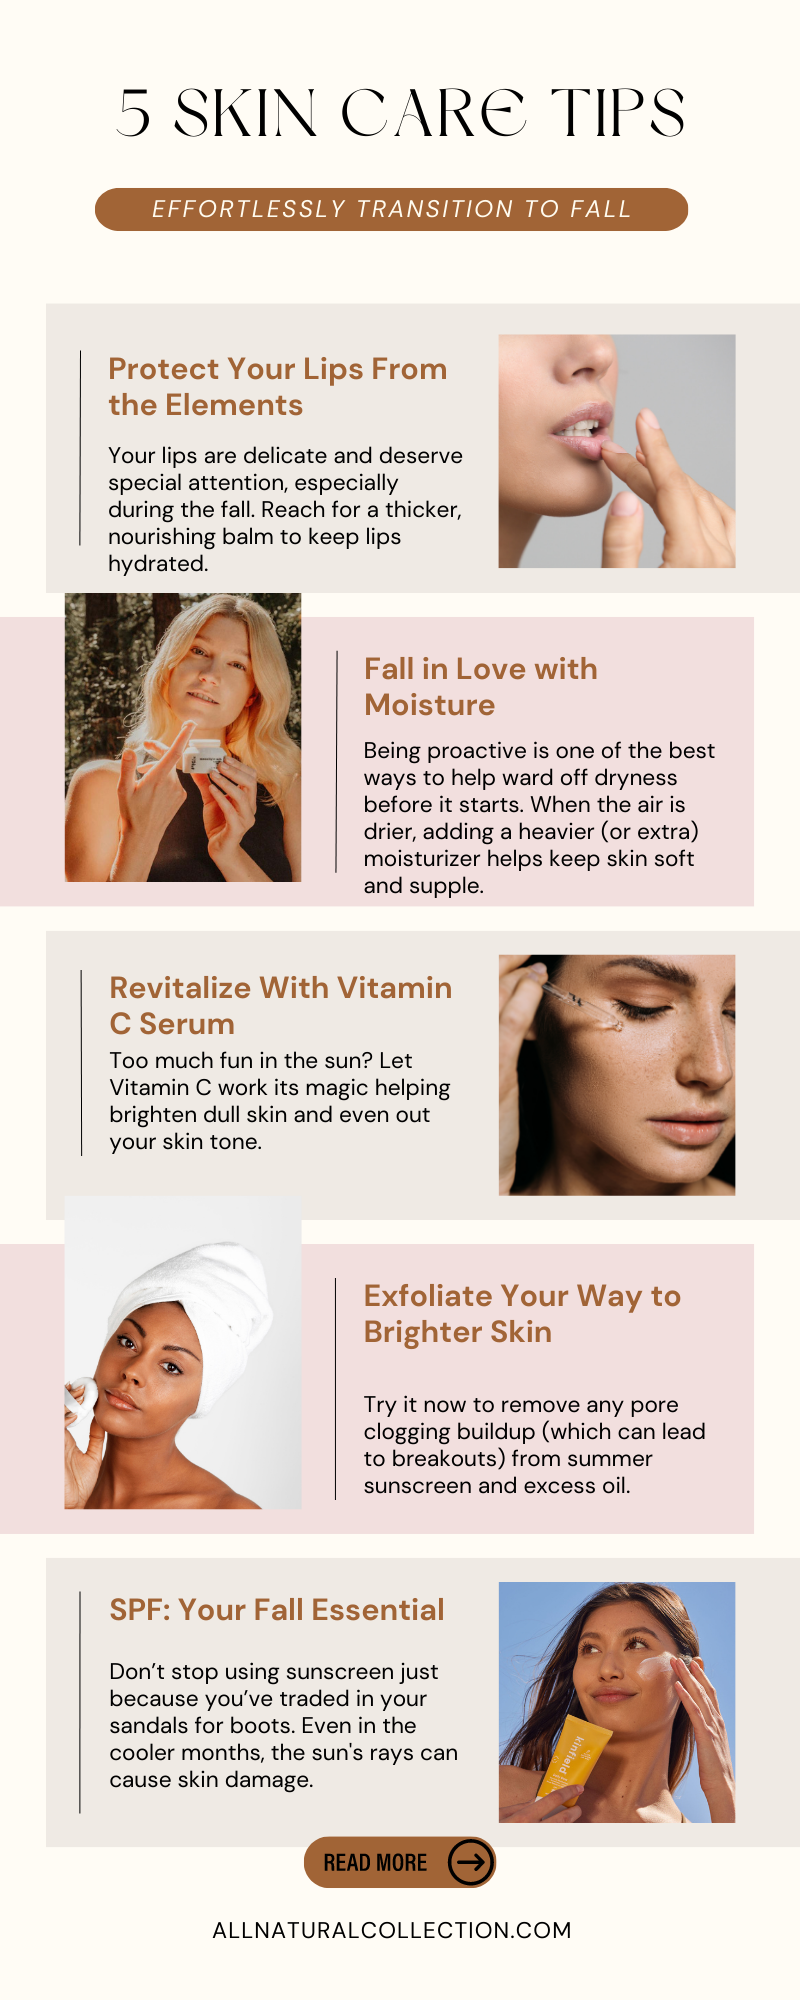 5 Simple Tips to Take Your Skin Care Routine from Summer to Fall